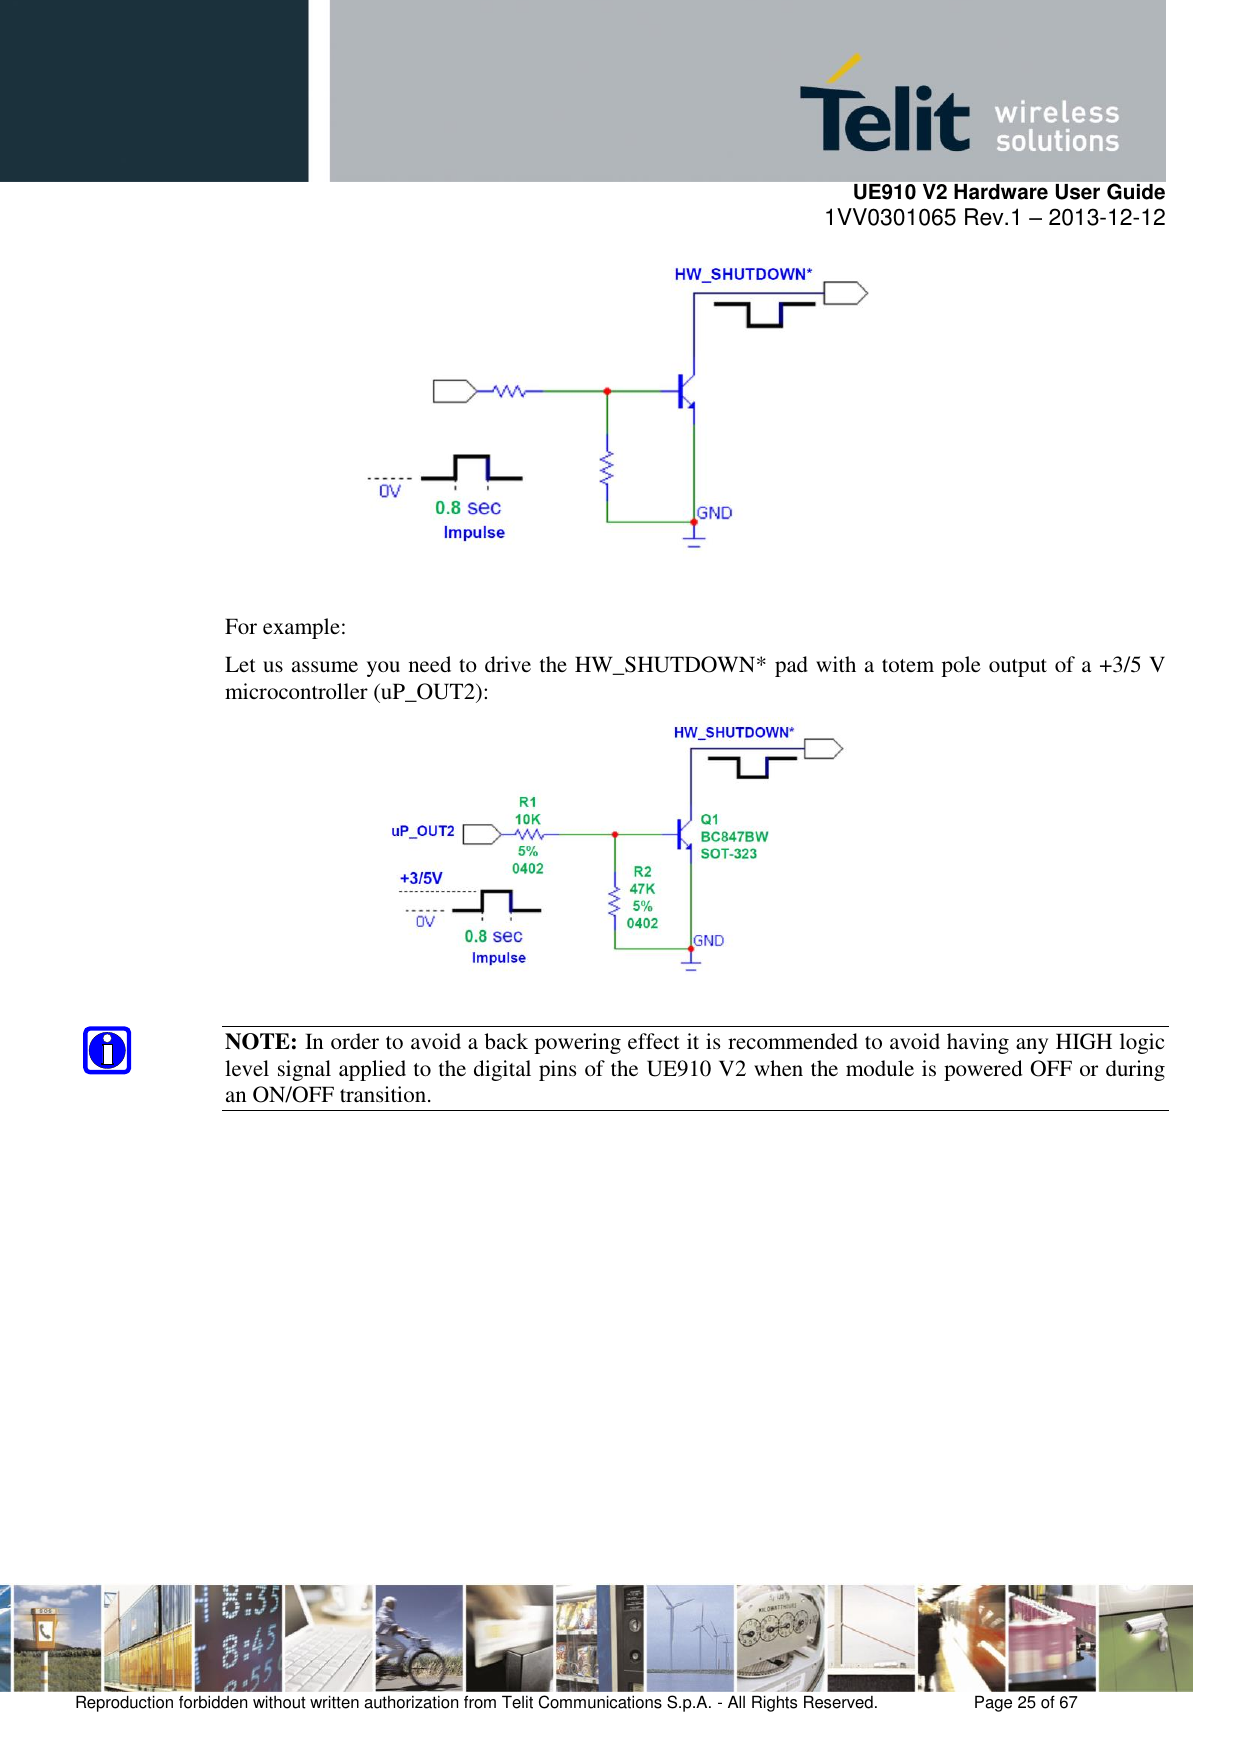     UE910 V2 Hardware User Guide 1VV0301065 Rev.1 – 2013-12-12  Reproduction forbidden without written authorization from Telit Communications S.p.A. - All Rights Reserved.    Page 25 of 67                                                       For example: Let us assume you need to drive the HW_SHUTDOWN* pad with a totem pole output of a +3/5 V microcontroller (uP_OUT2):   NOTE: In order to avoid a back powering effect it is recommended to avoid having any HIGH logic level signal applied to the digital pins of the UE910 V2 when the module is powered OFF or during an ON/OFF transition.       